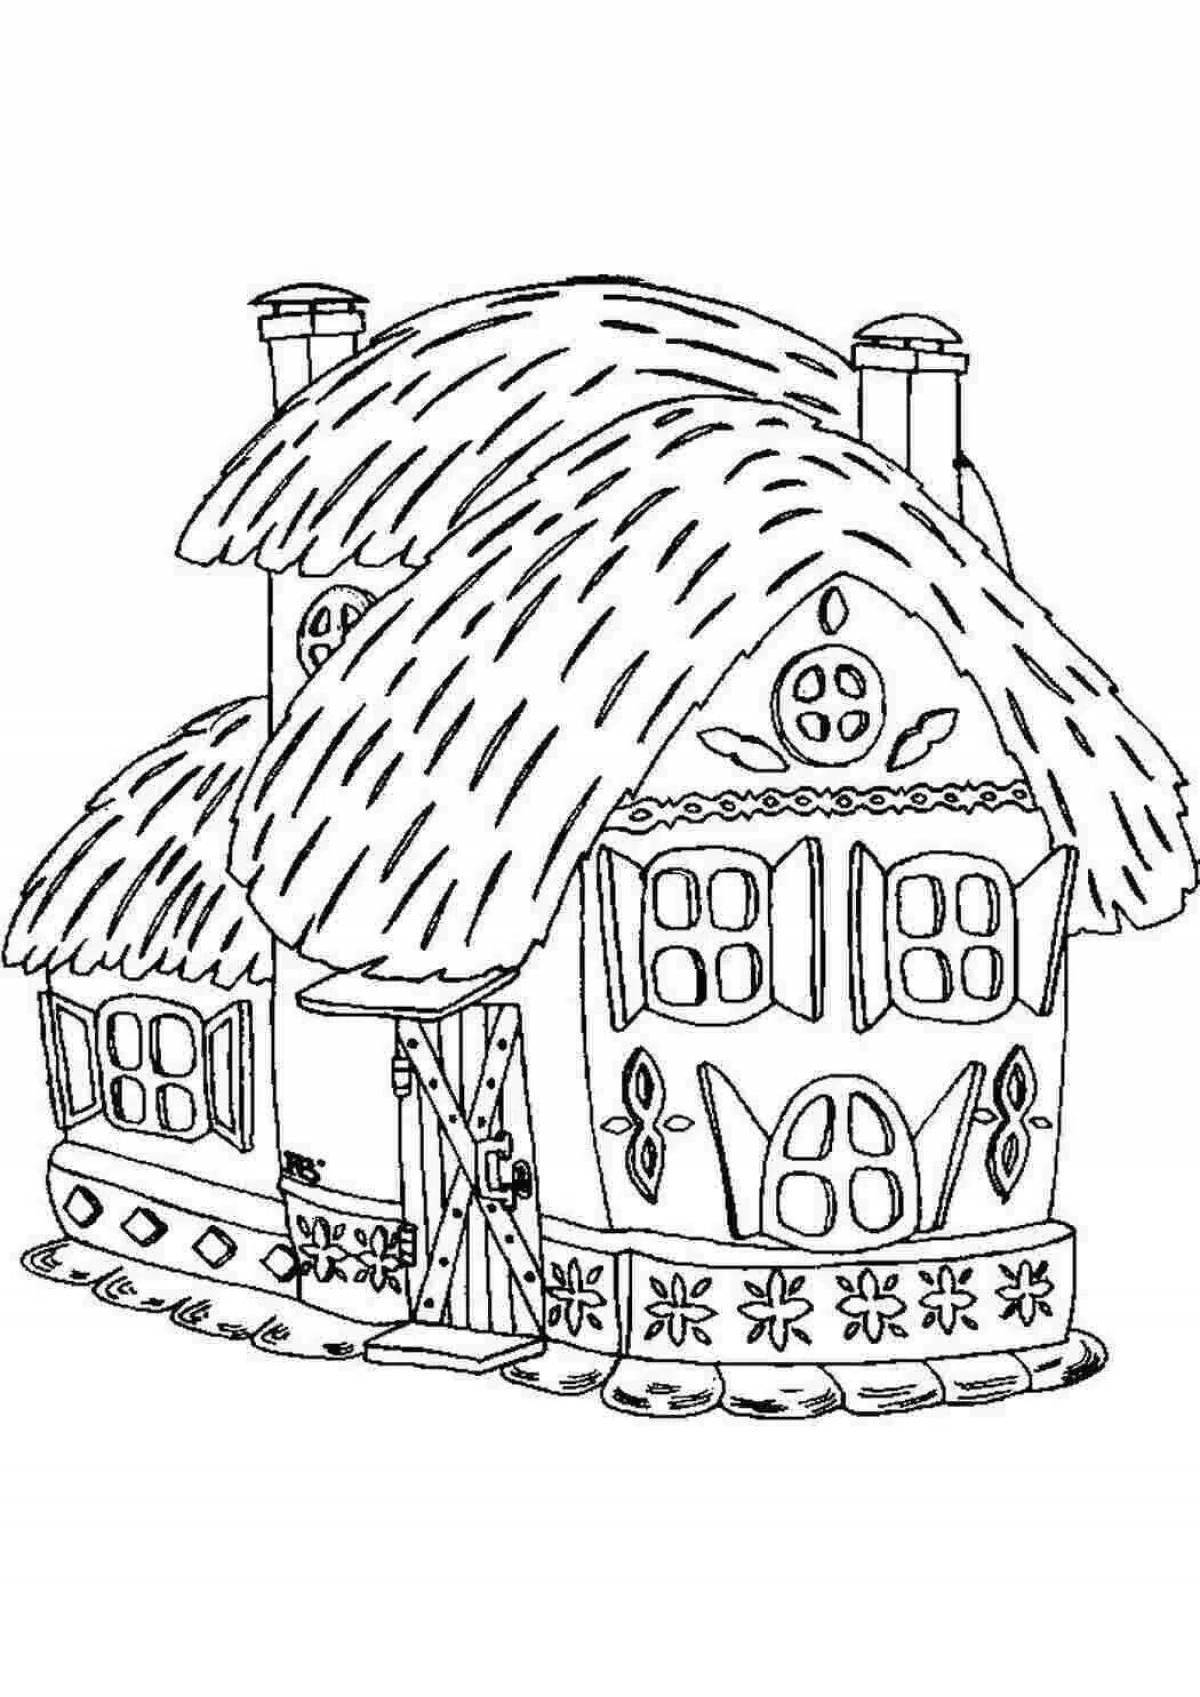 Bright drawing of a house for children